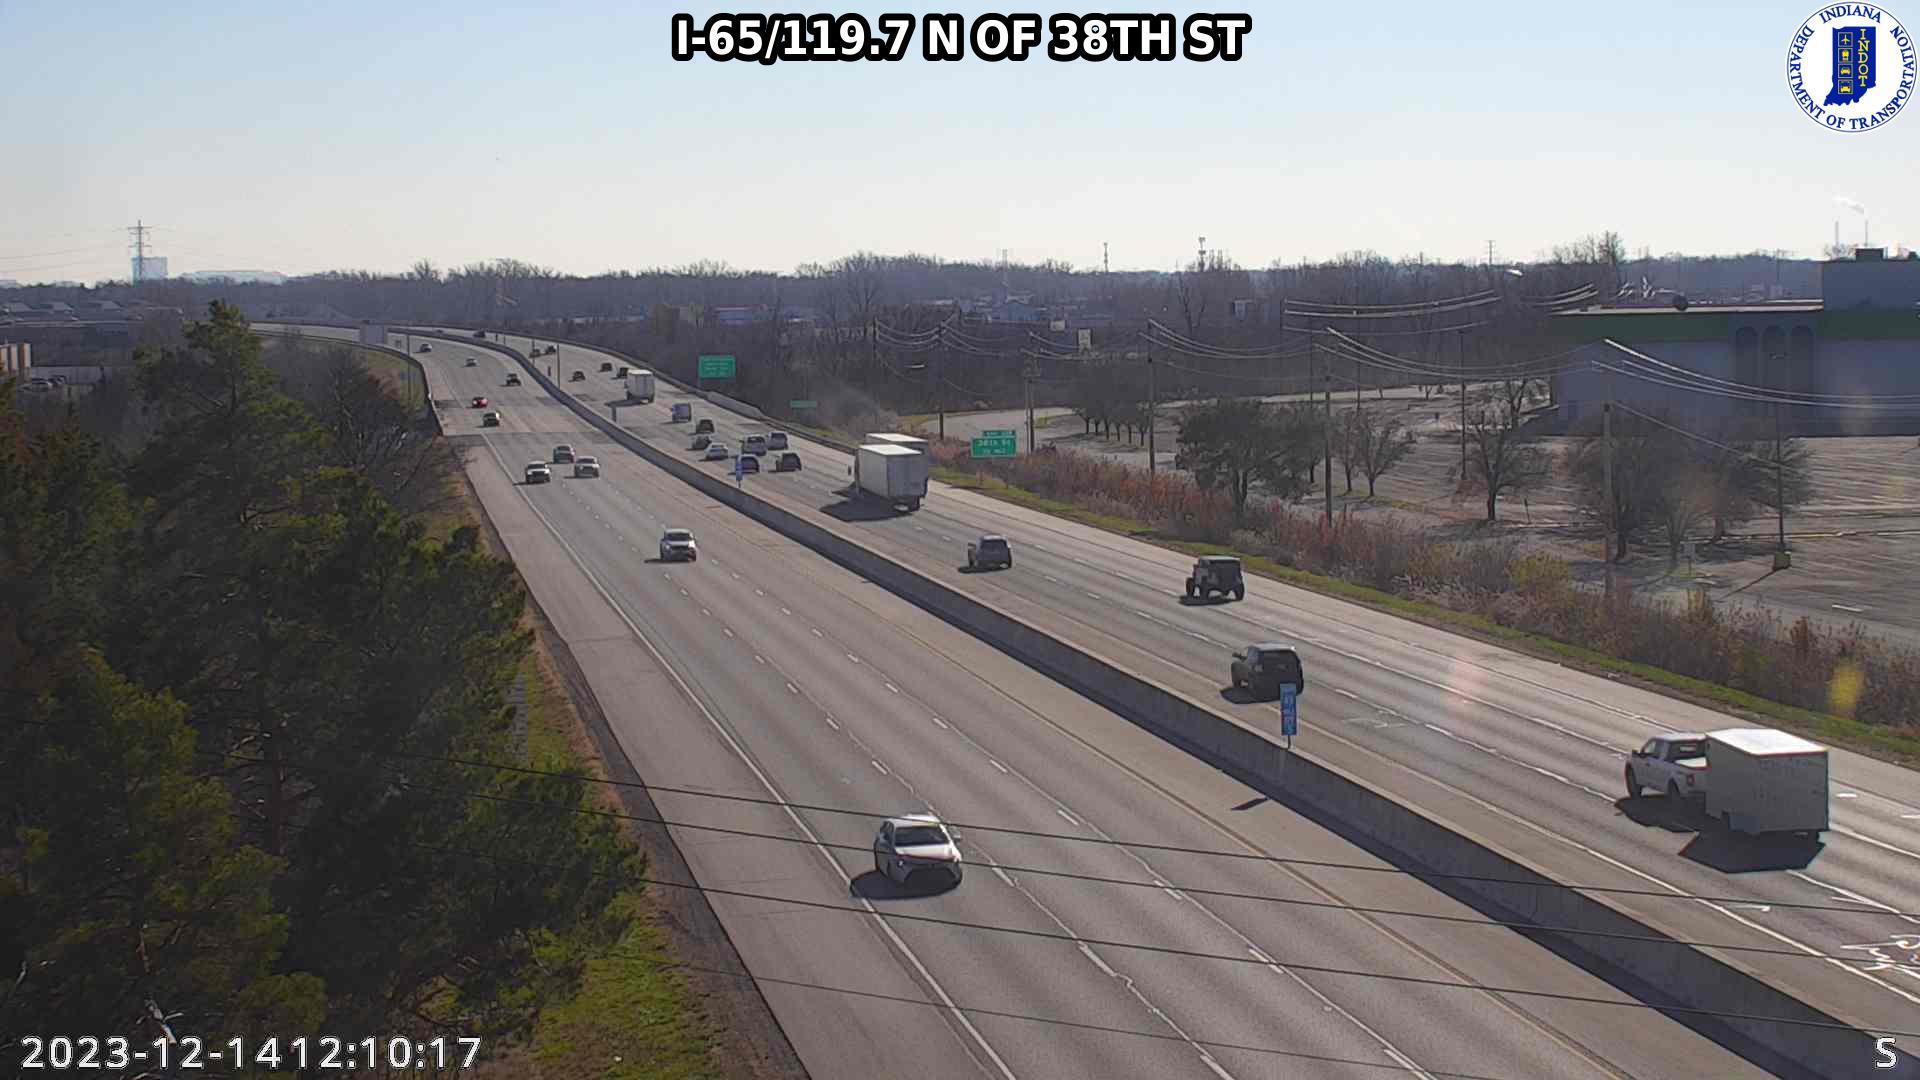 Traffic Cam Indianapolis: I-65: I-65/119.7 N OF 38TH ST Player